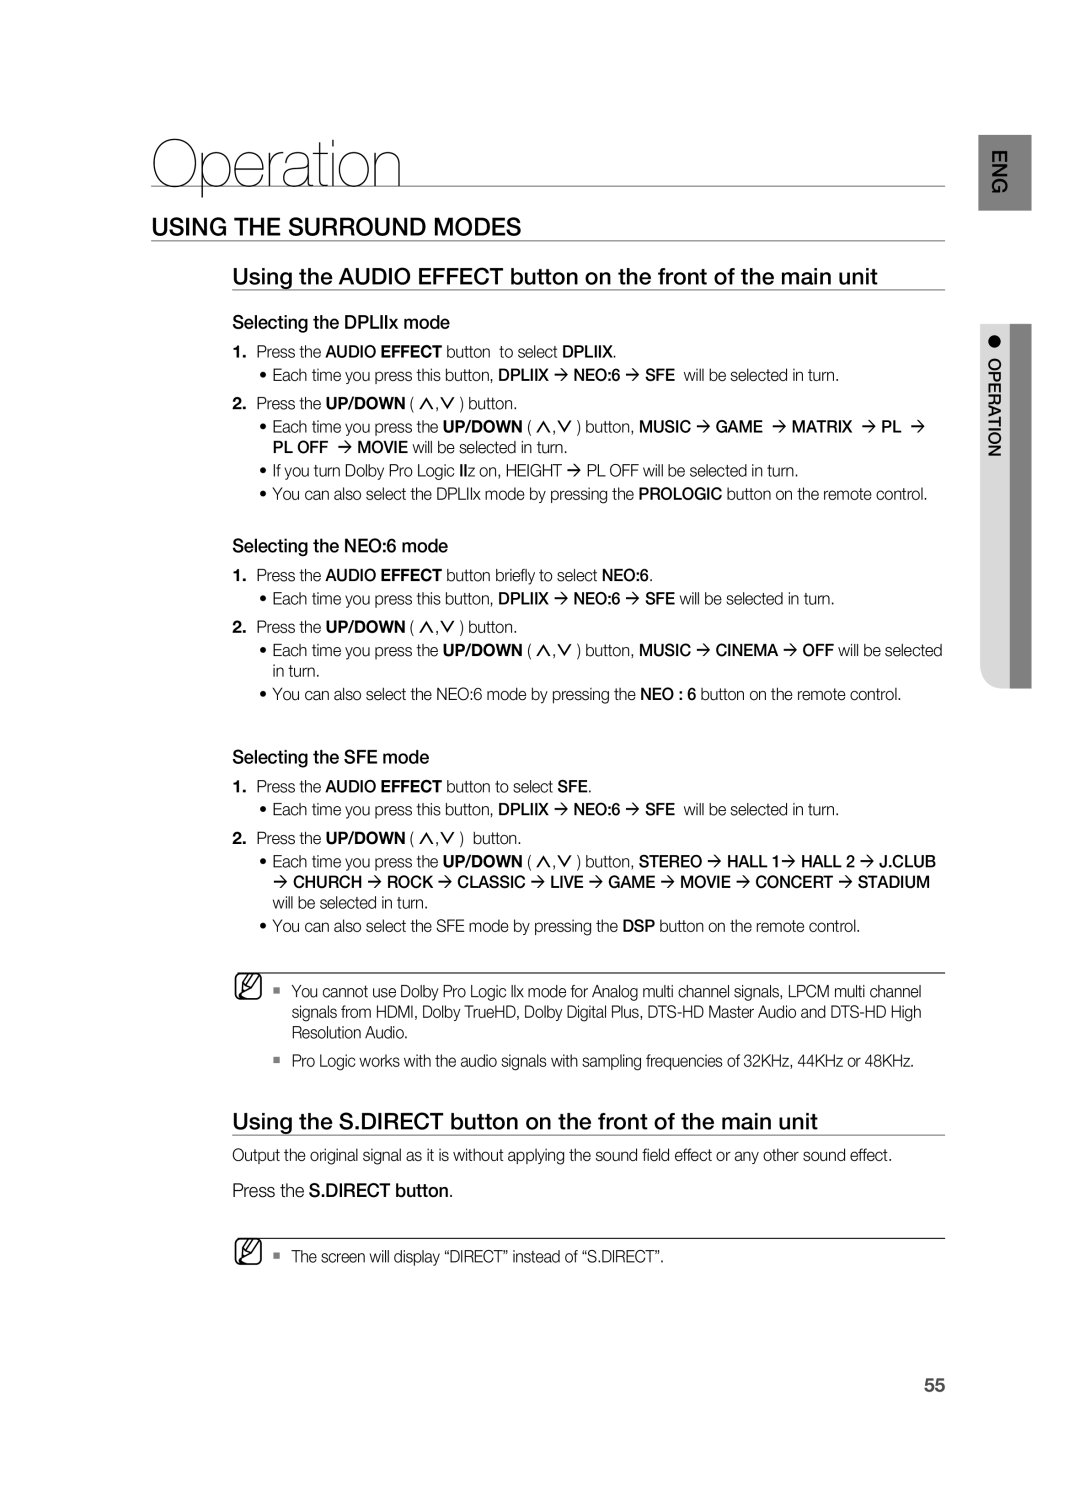 Samsung HW-C900-XAA user manual Operation, Using The Surround Modes 